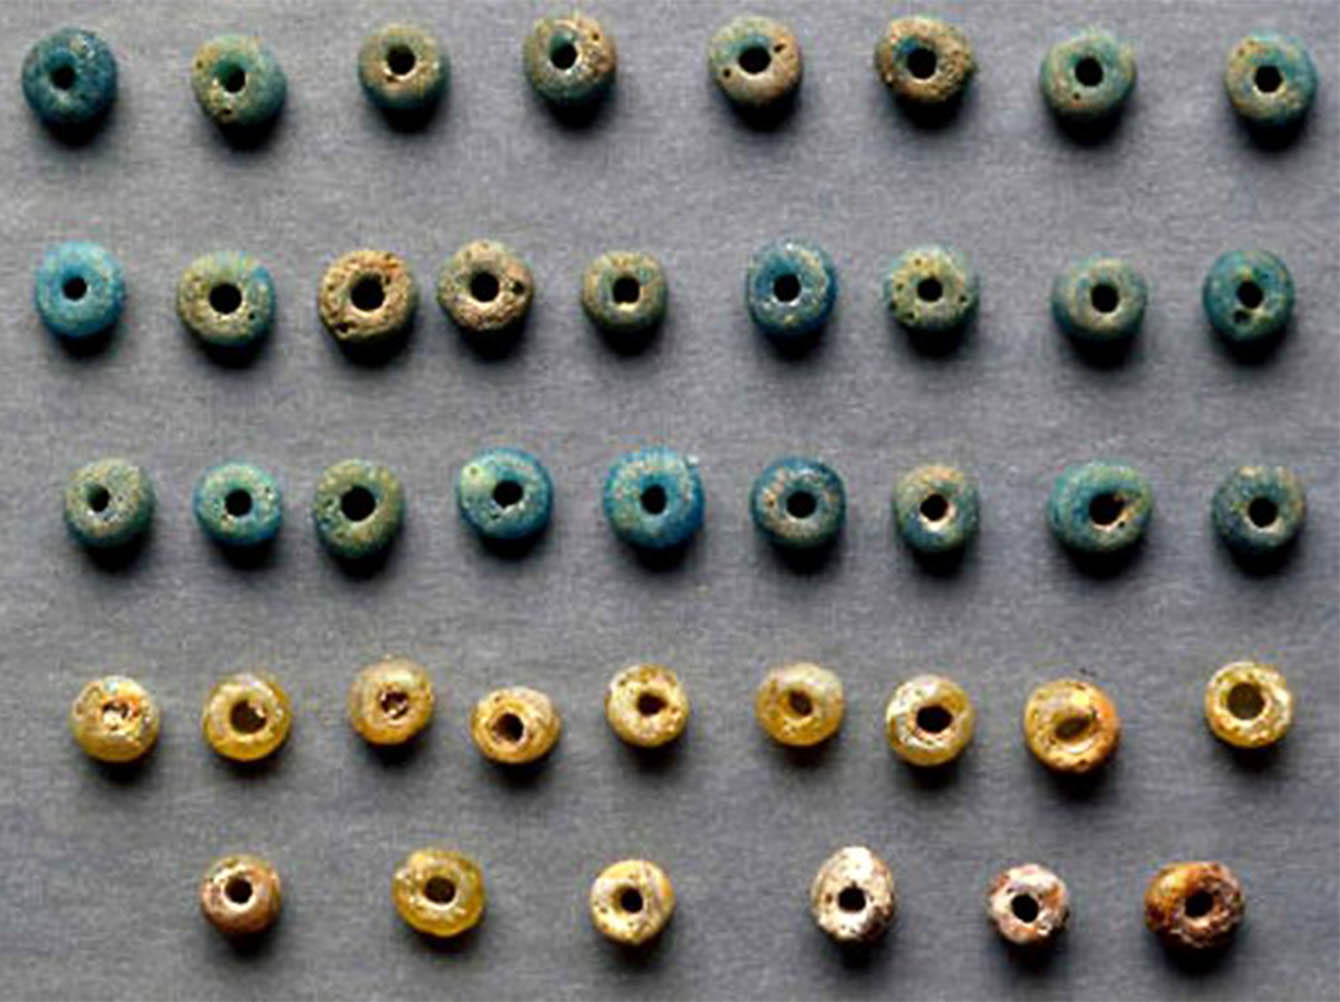 Beads from Burial 340 at the African Burial Ground